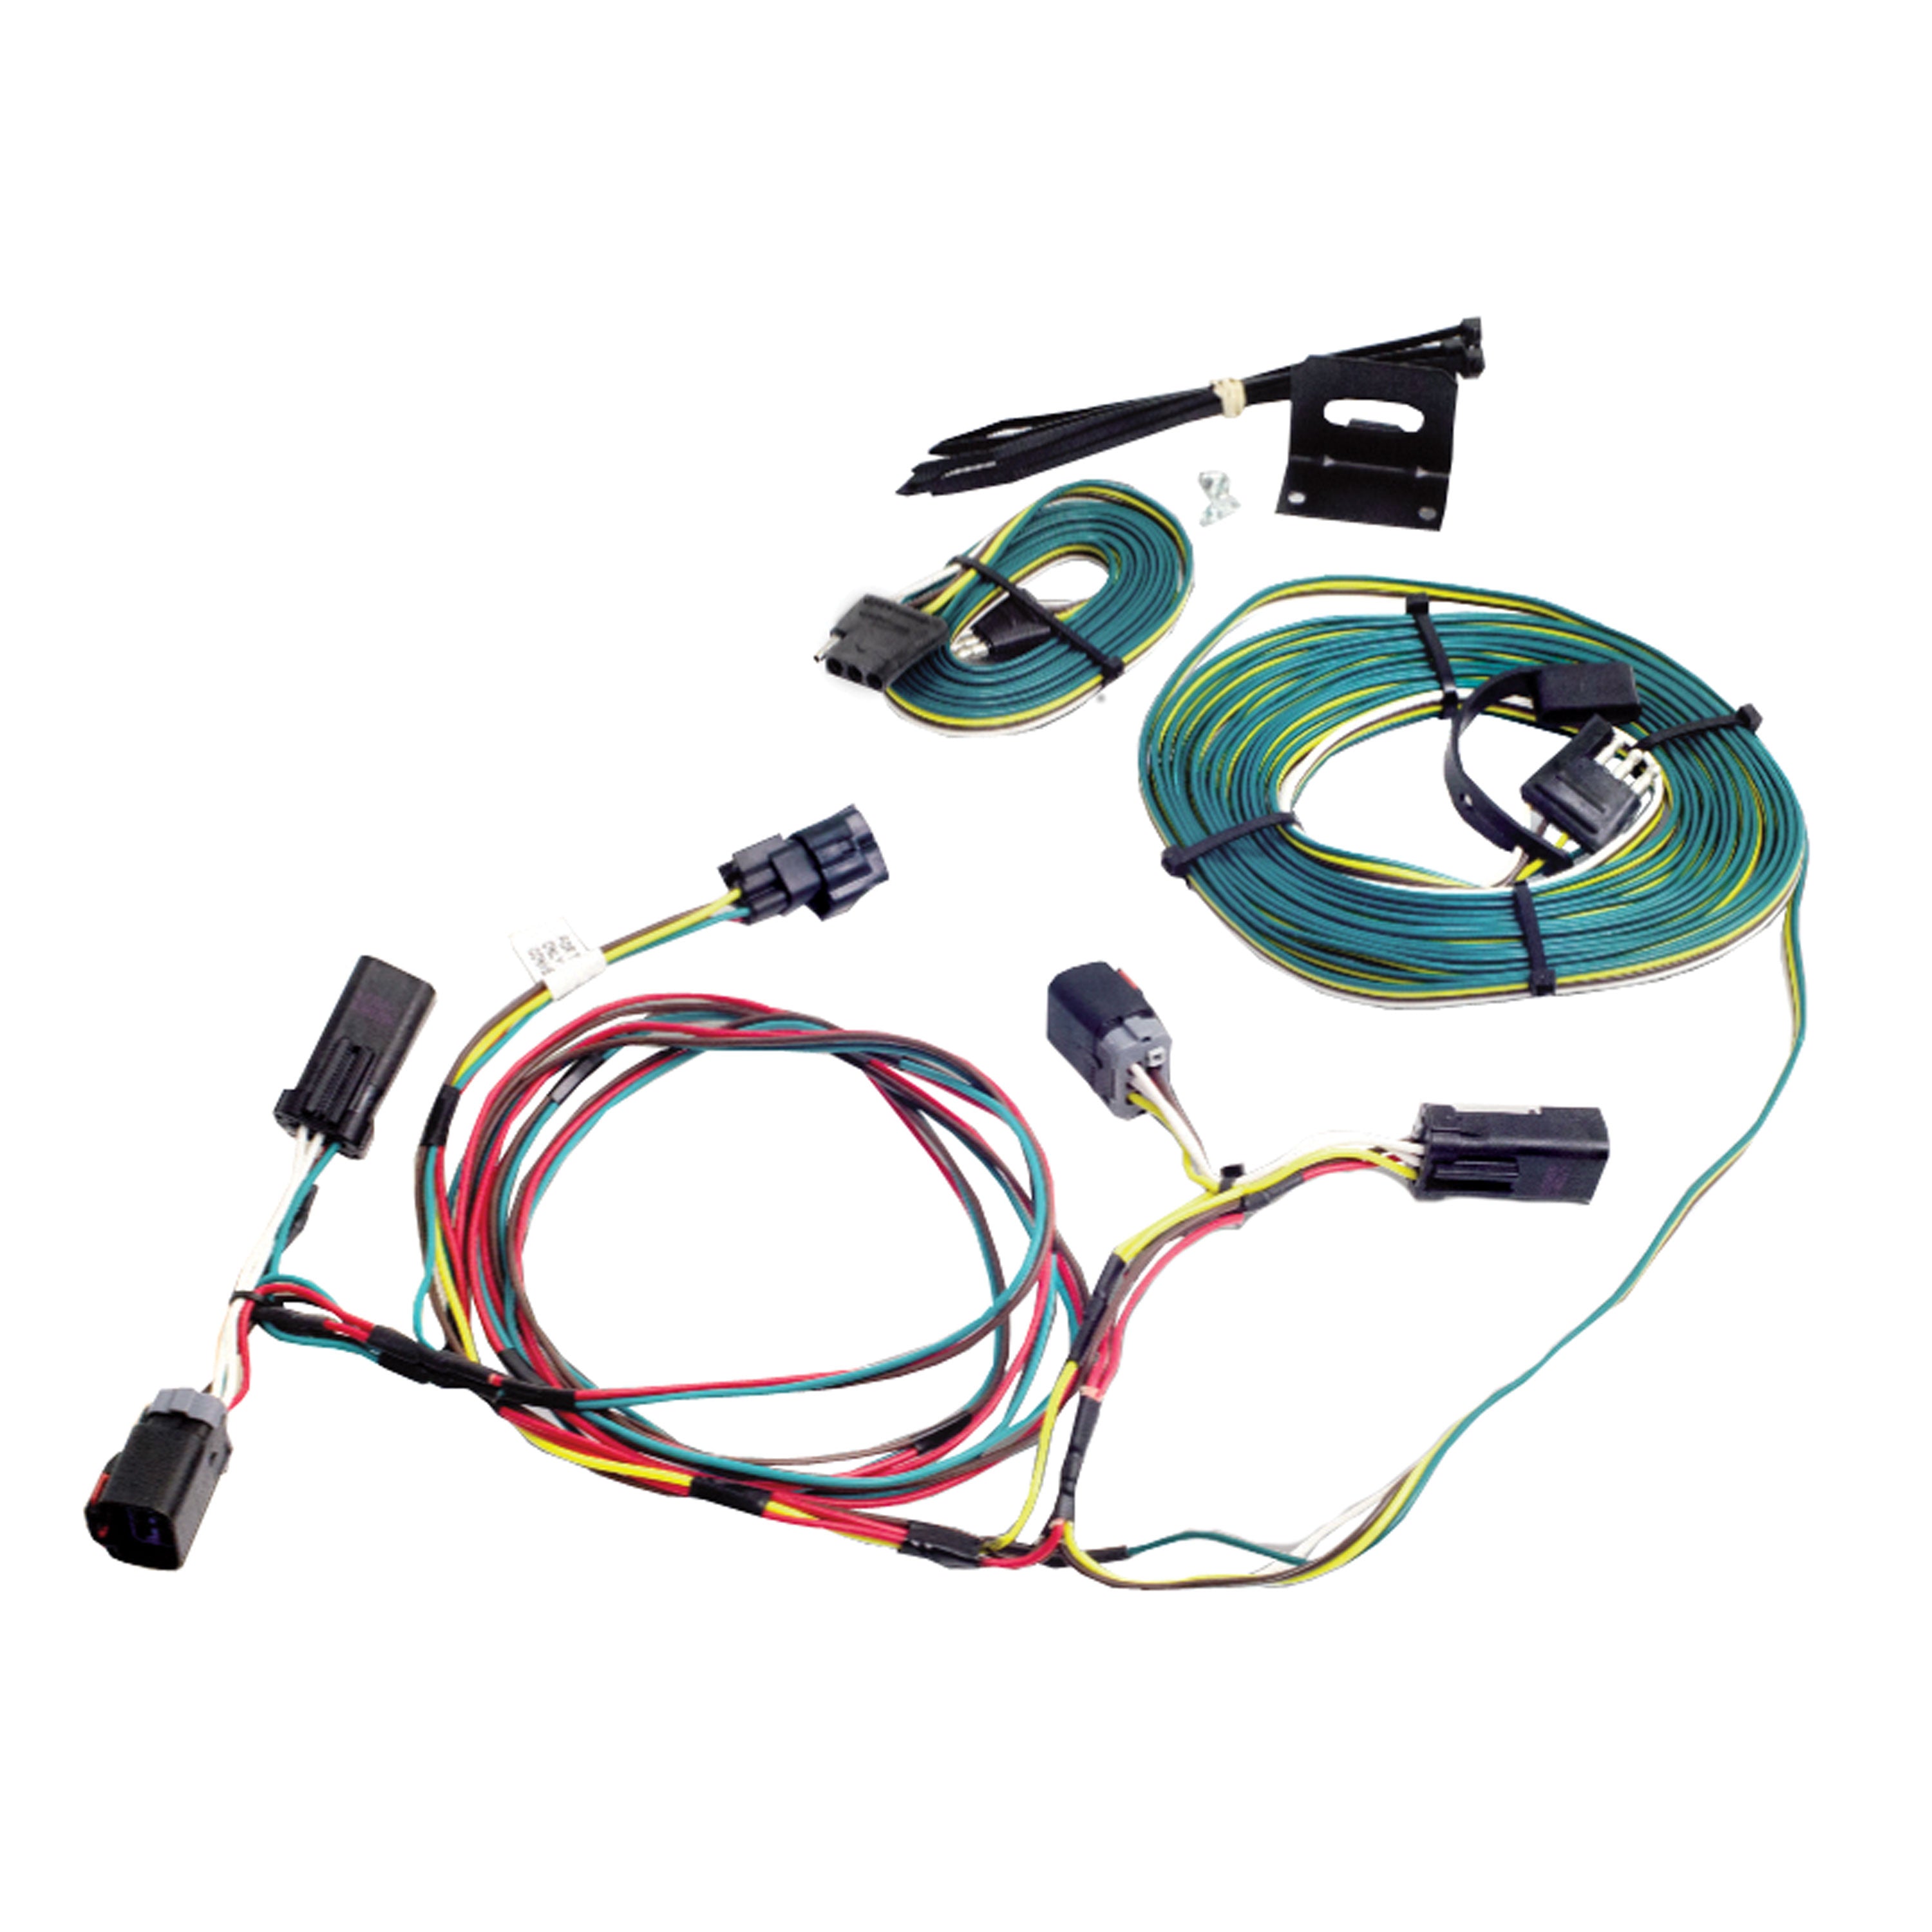 Demco 9523072 Towed Connector Vehicle Wiring Kit - For Chevrolet Avalanche '07-'12